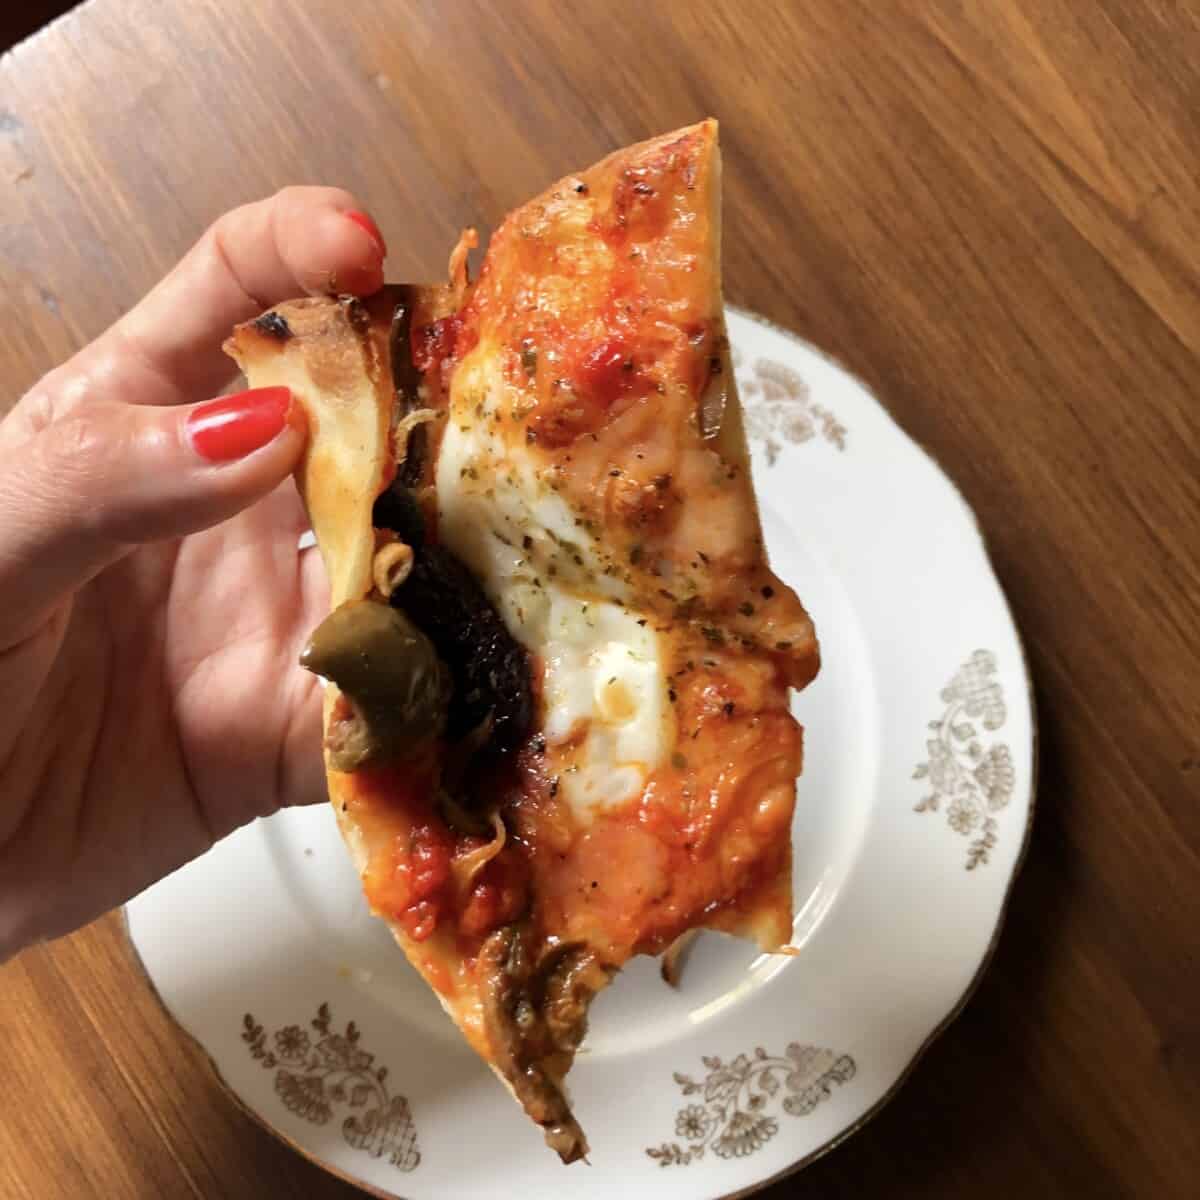 my hand holding a piece of crispy, yet bendable pizza slice with a bite taken out.